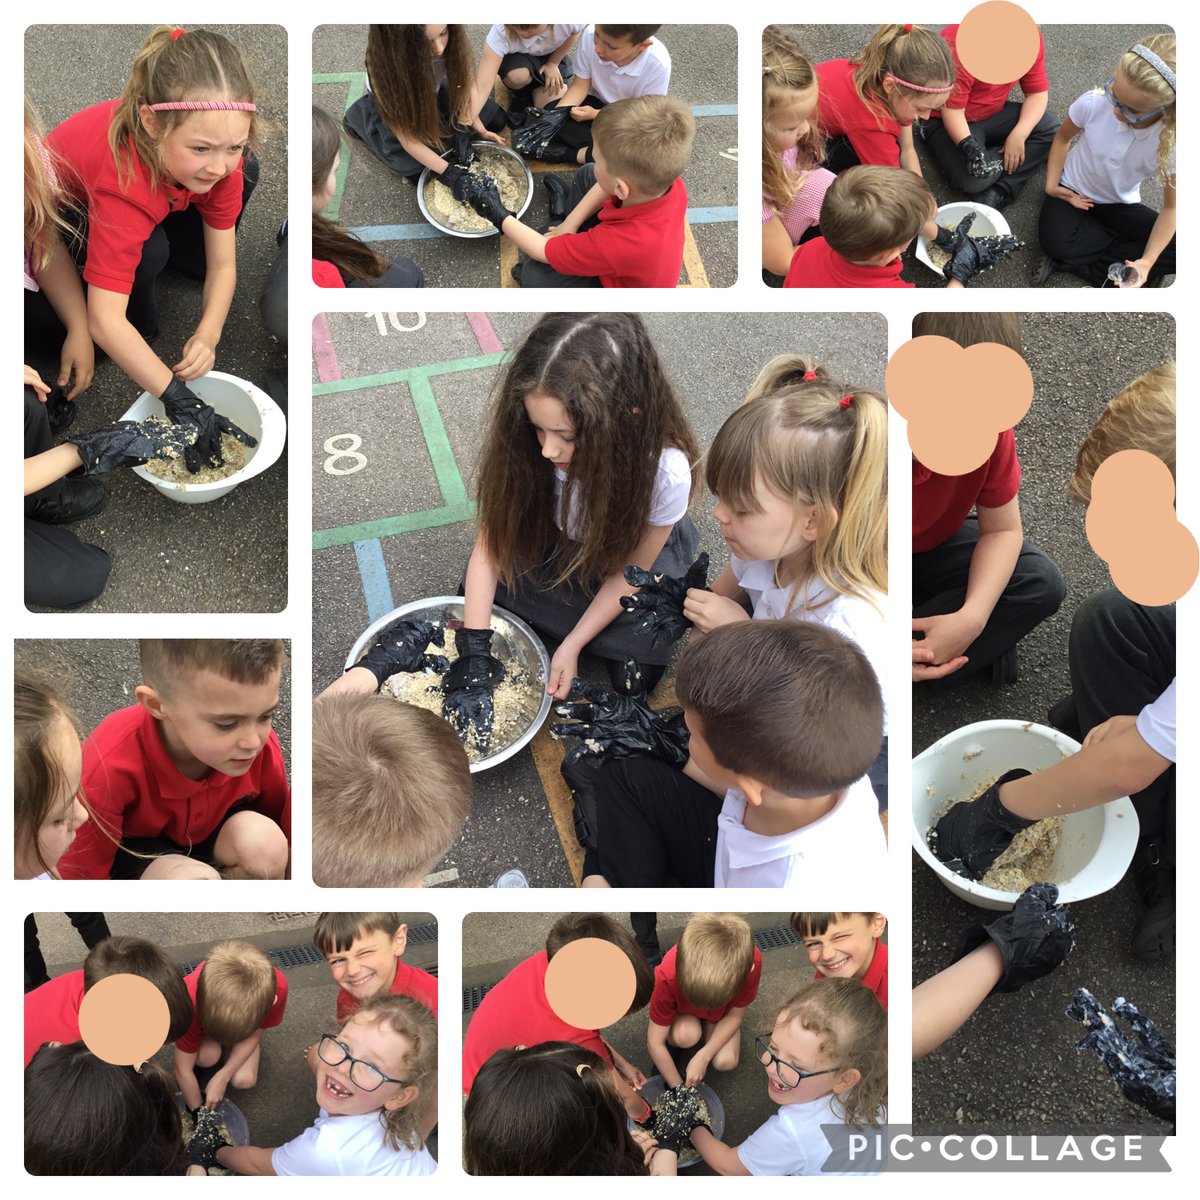 Class 2 have been learning how to write clear instructions. We put our learning to the test by following our instructions to make some birdseed fat balls! We are sure the birds will love them when we hang them up next week. @jmatschools #verymessy #reasonstowrite #Teamwork